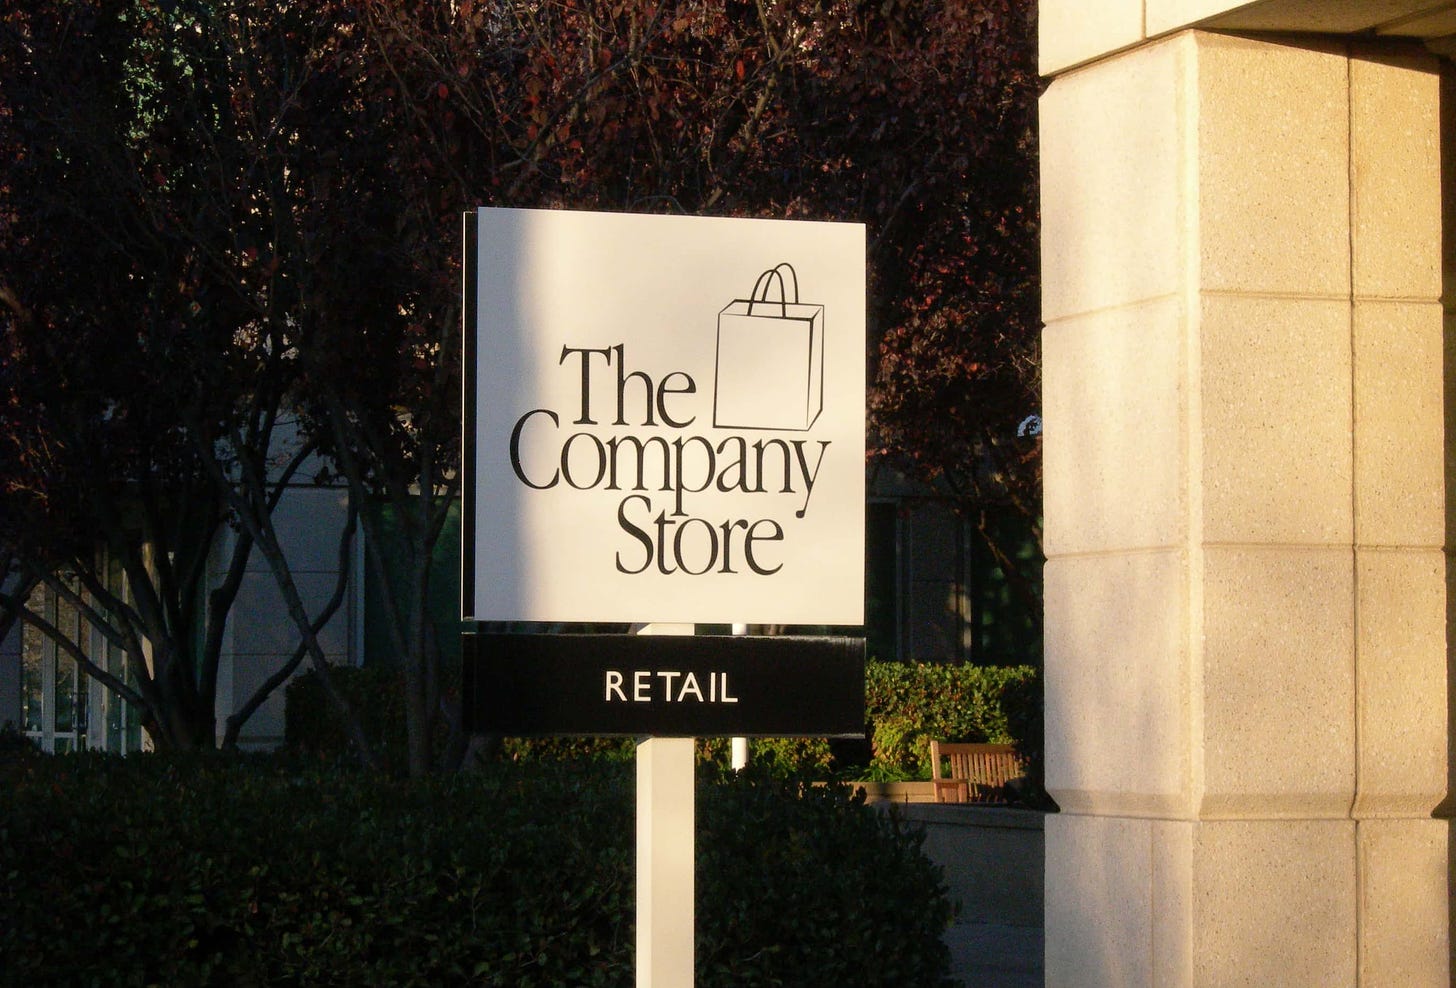 The Company Store sign, set in Garamond.